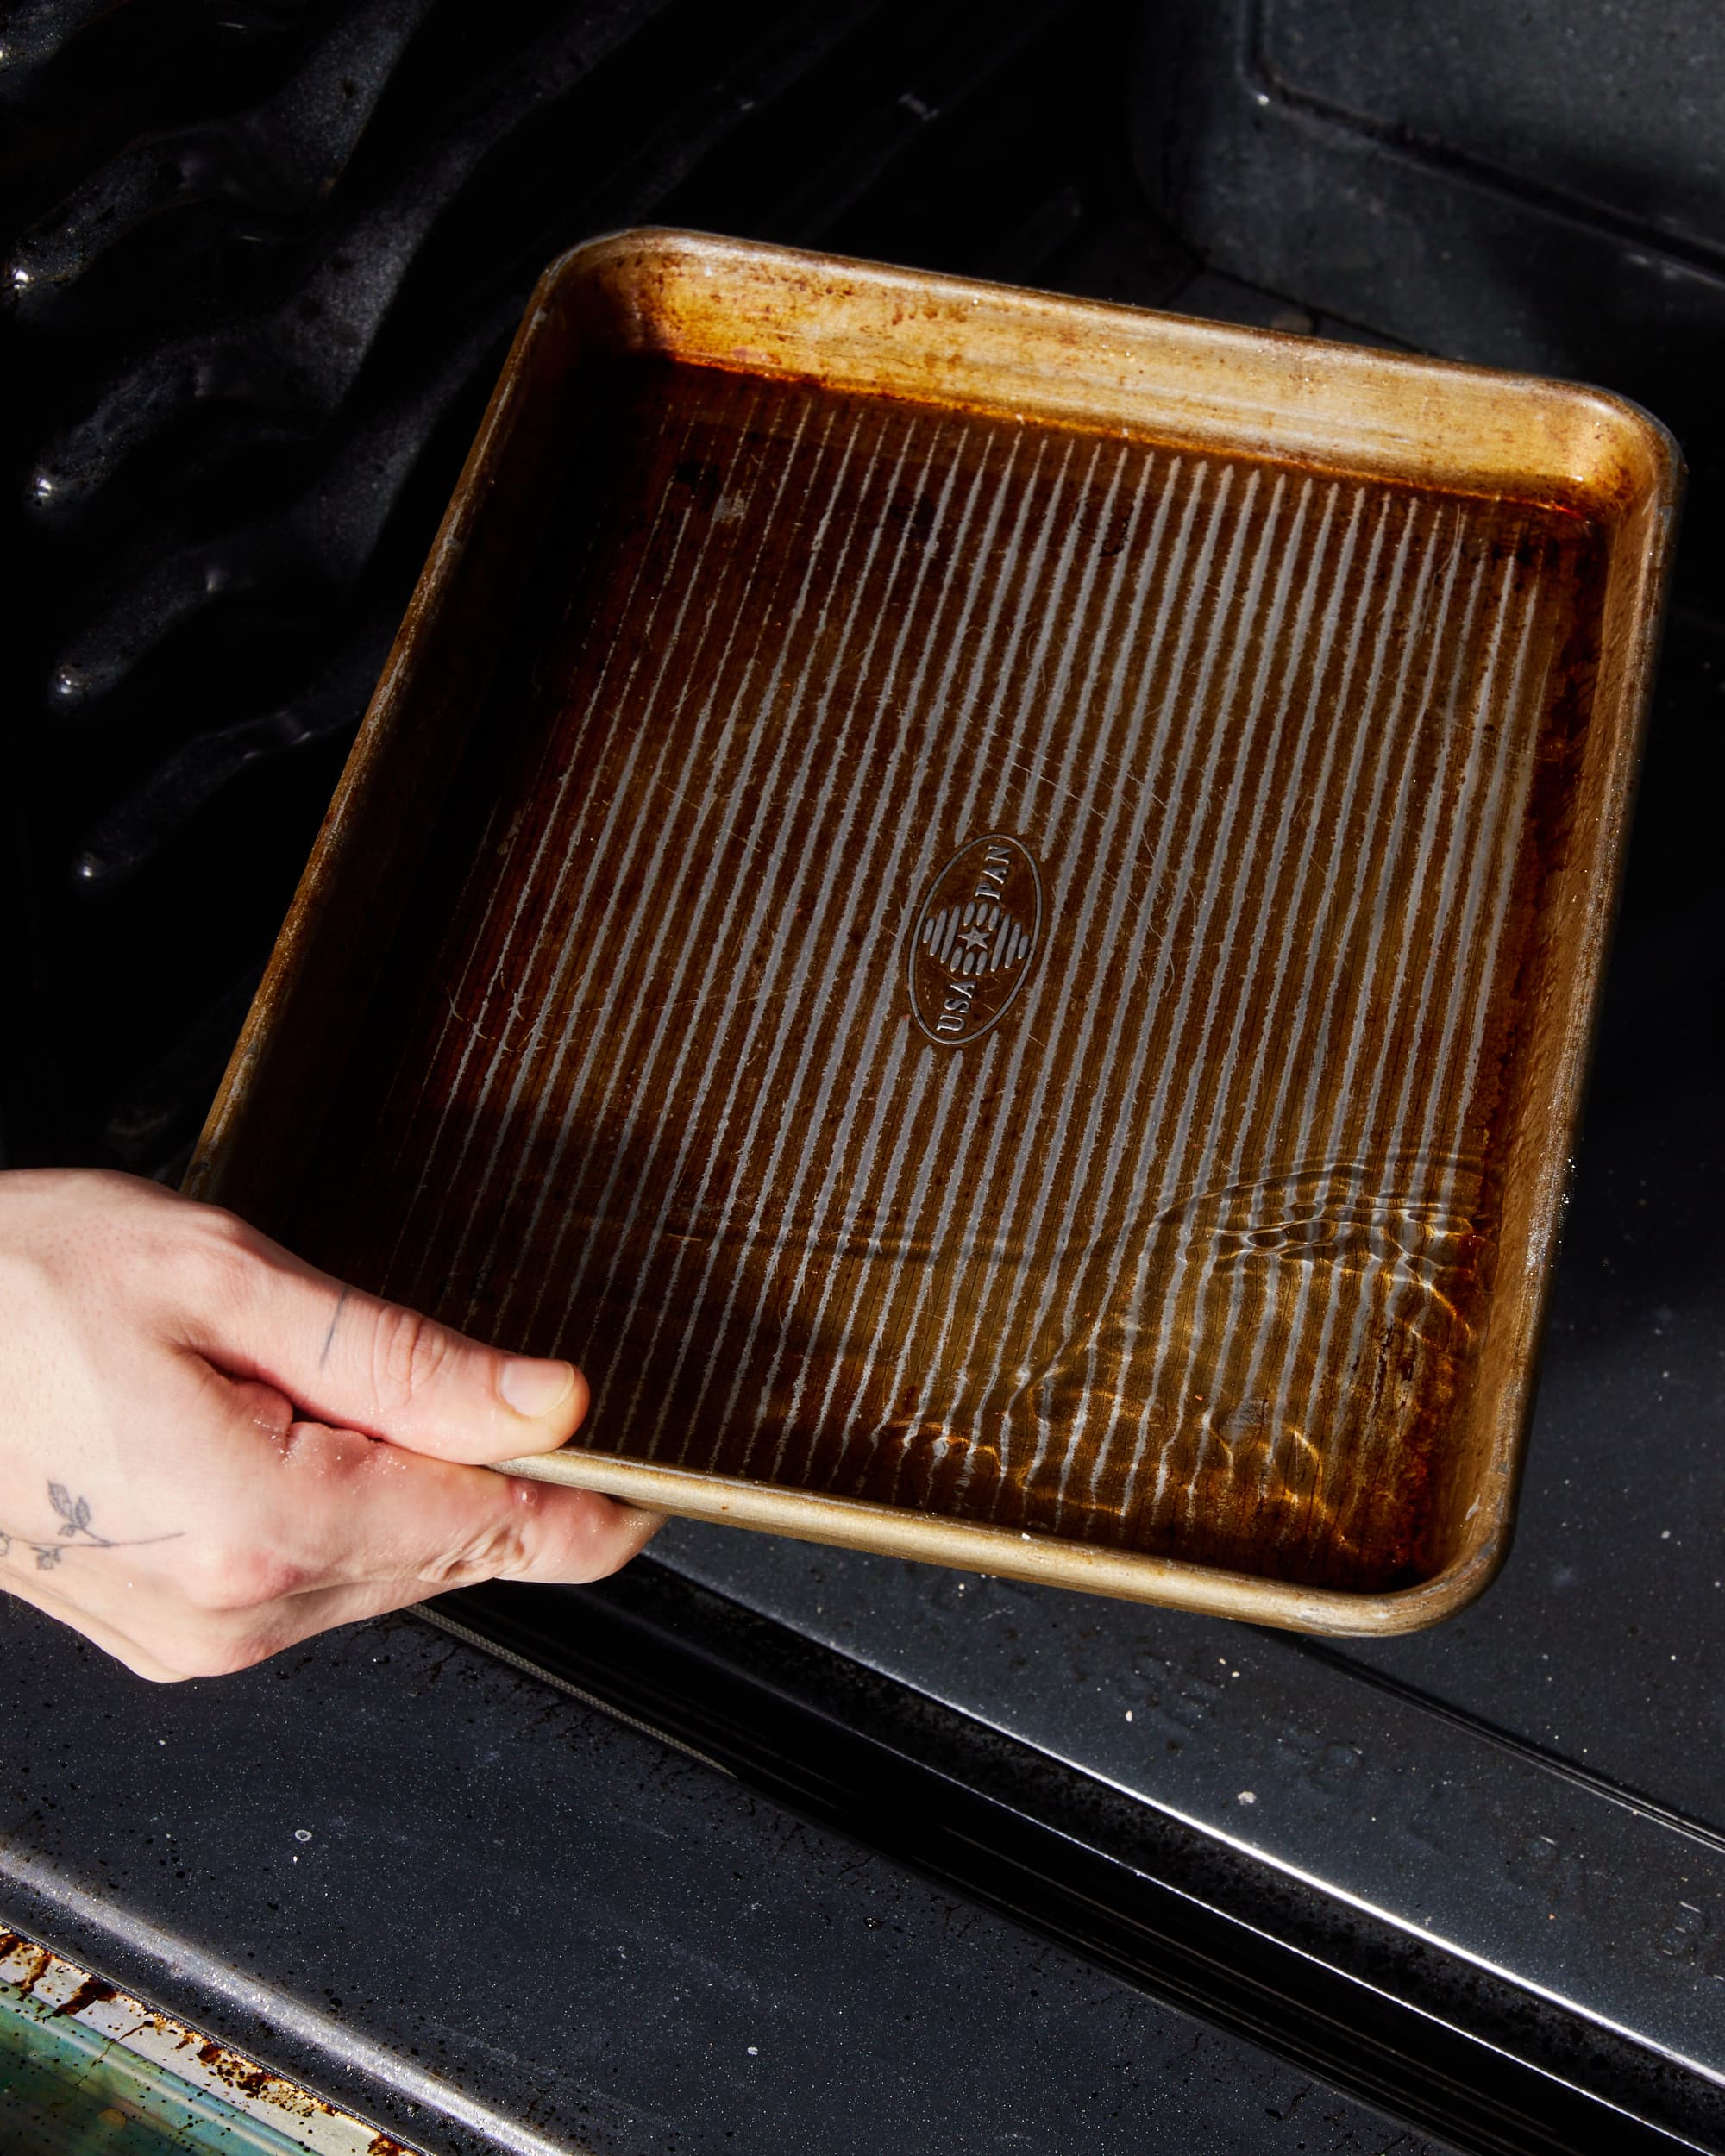 How to Clean Oven Trays (A Handy Guide!)